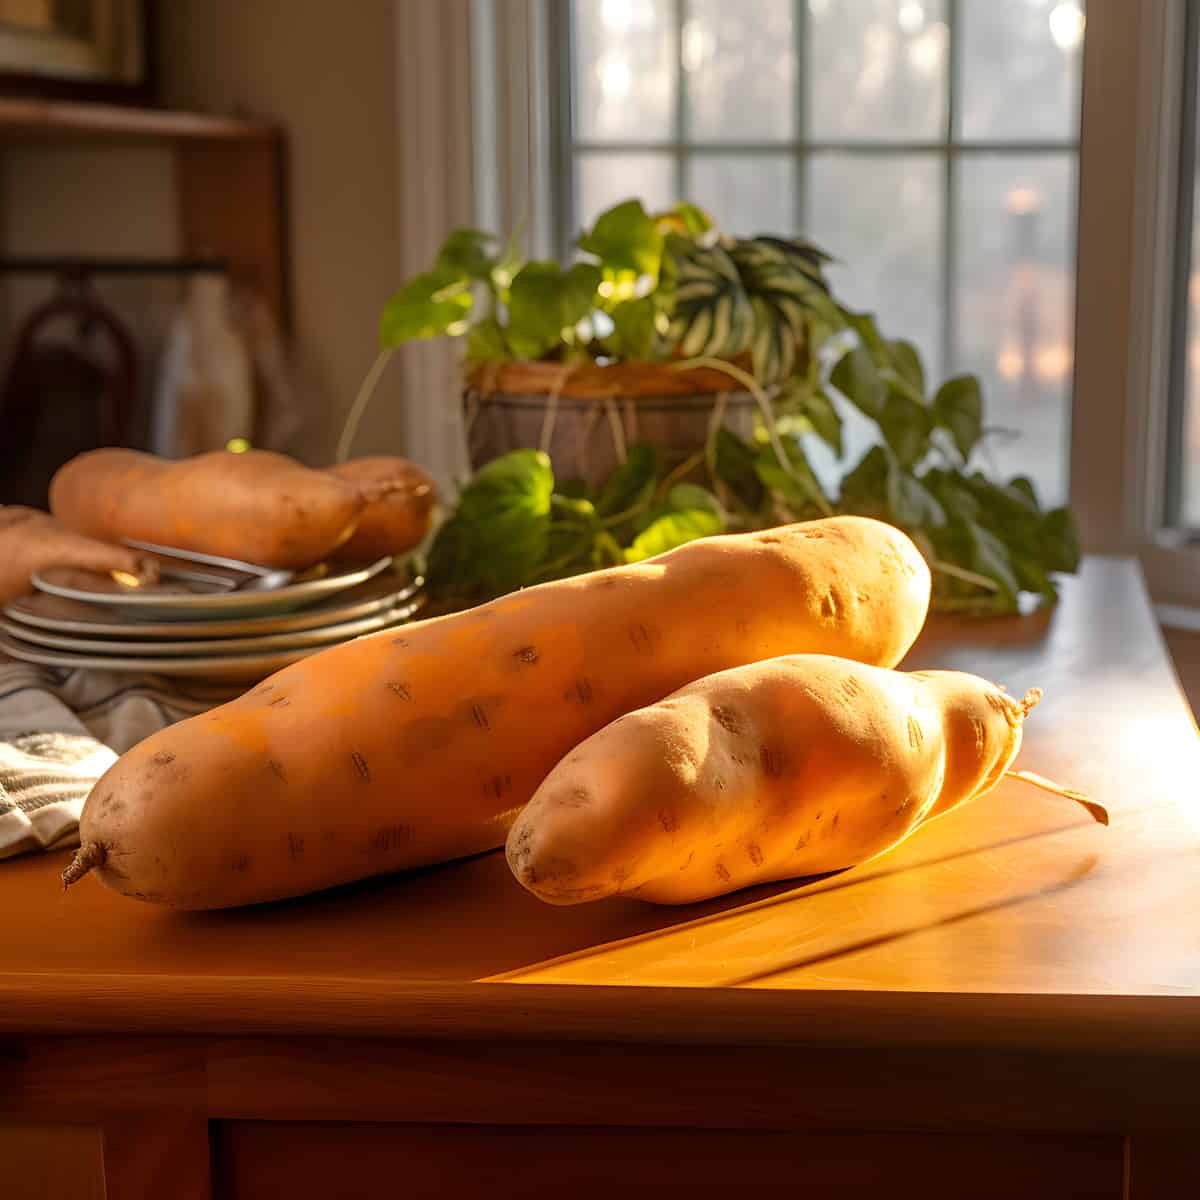 Maryland Golden Sweet Potatoes on a kitchen counter